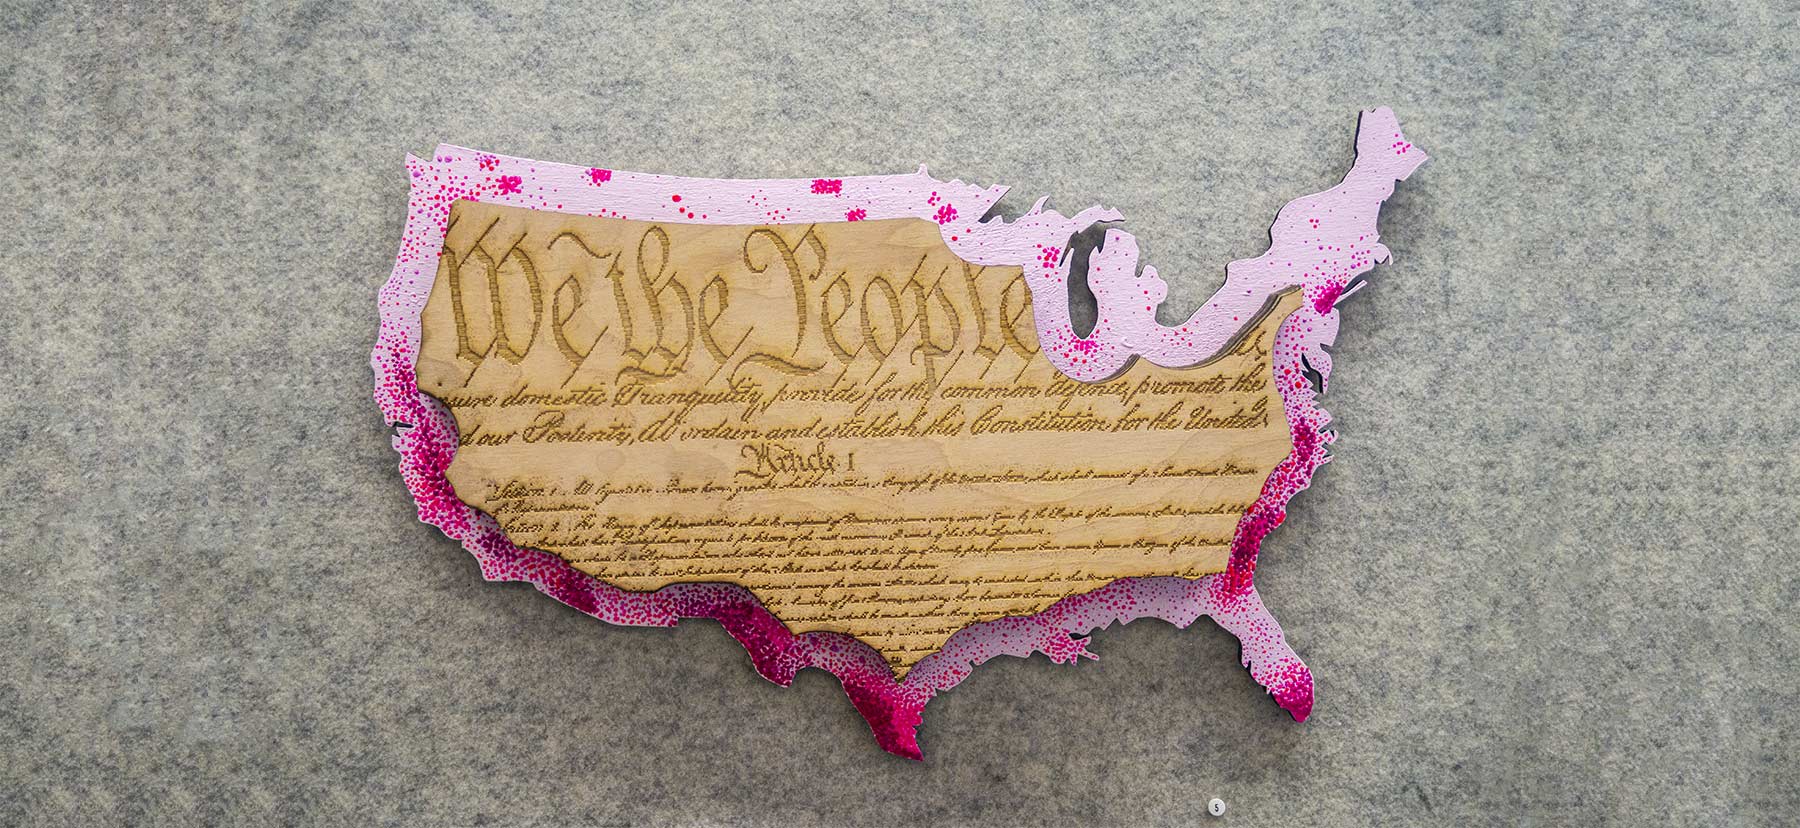 we the people etched into an outline of the united states